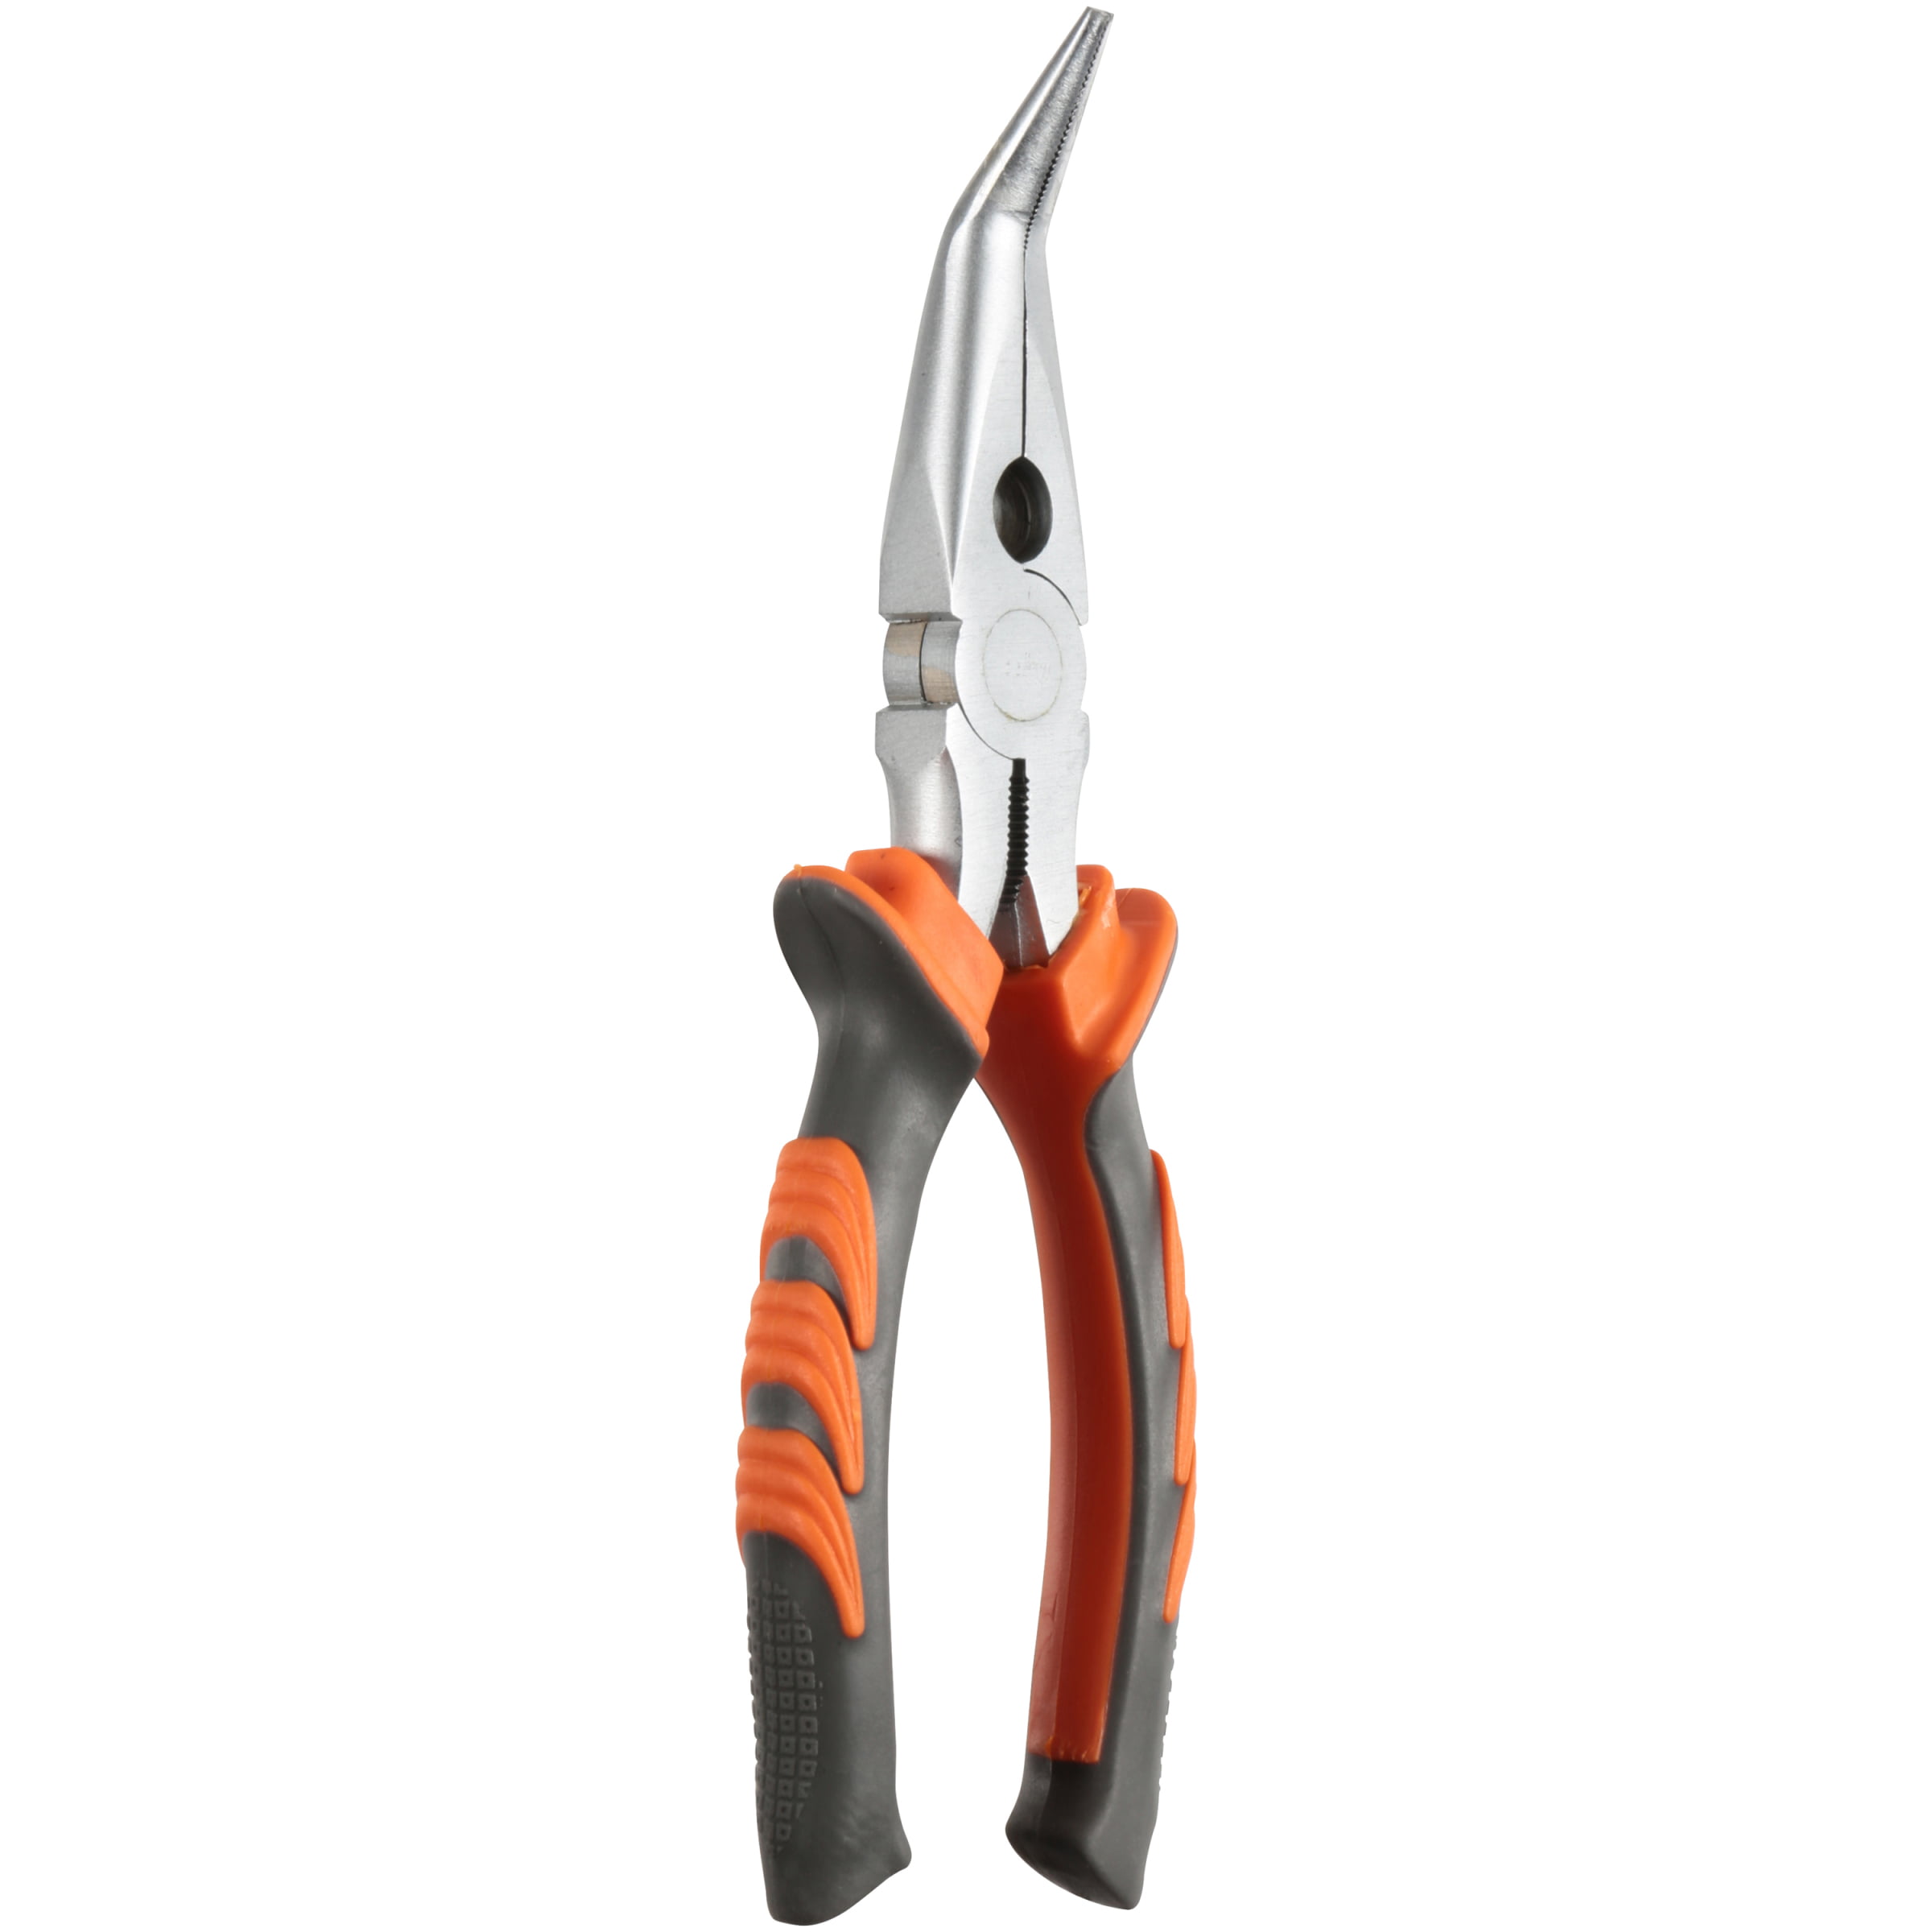 South bend 8 in. bent nose pliers